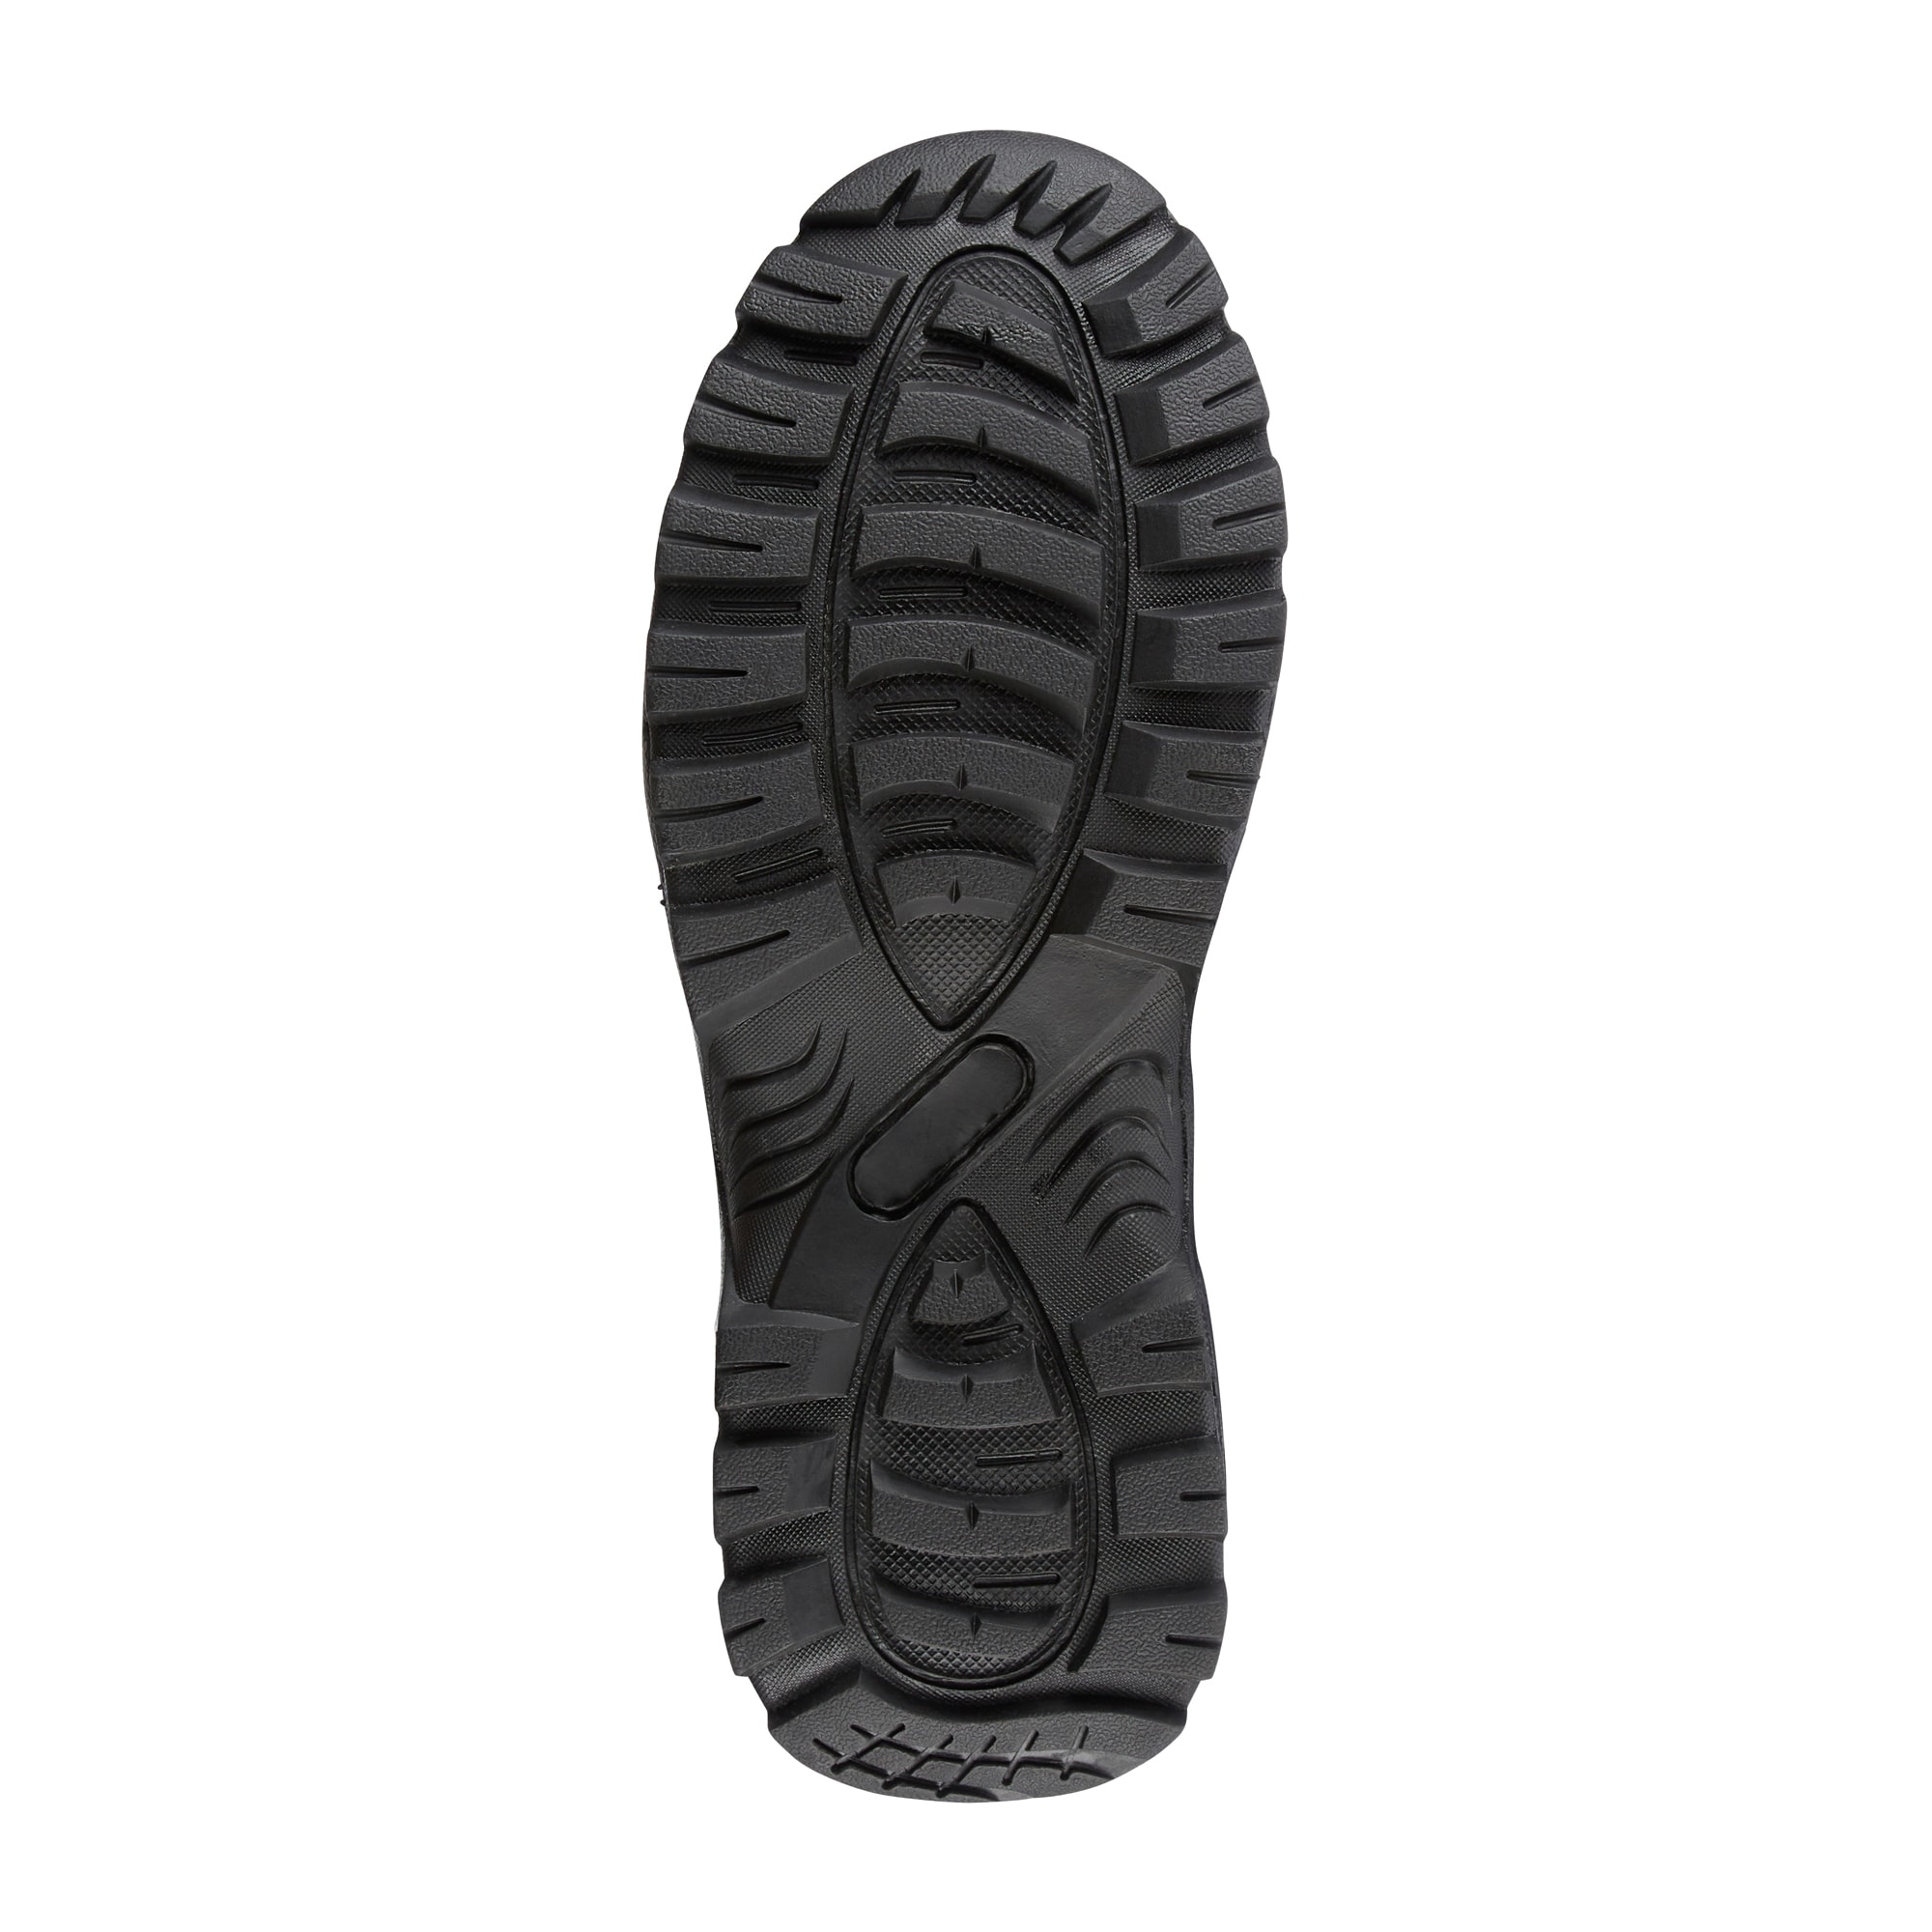 Purchase the Mil-Tec Tactical Boots Two-Zip black by ASMC